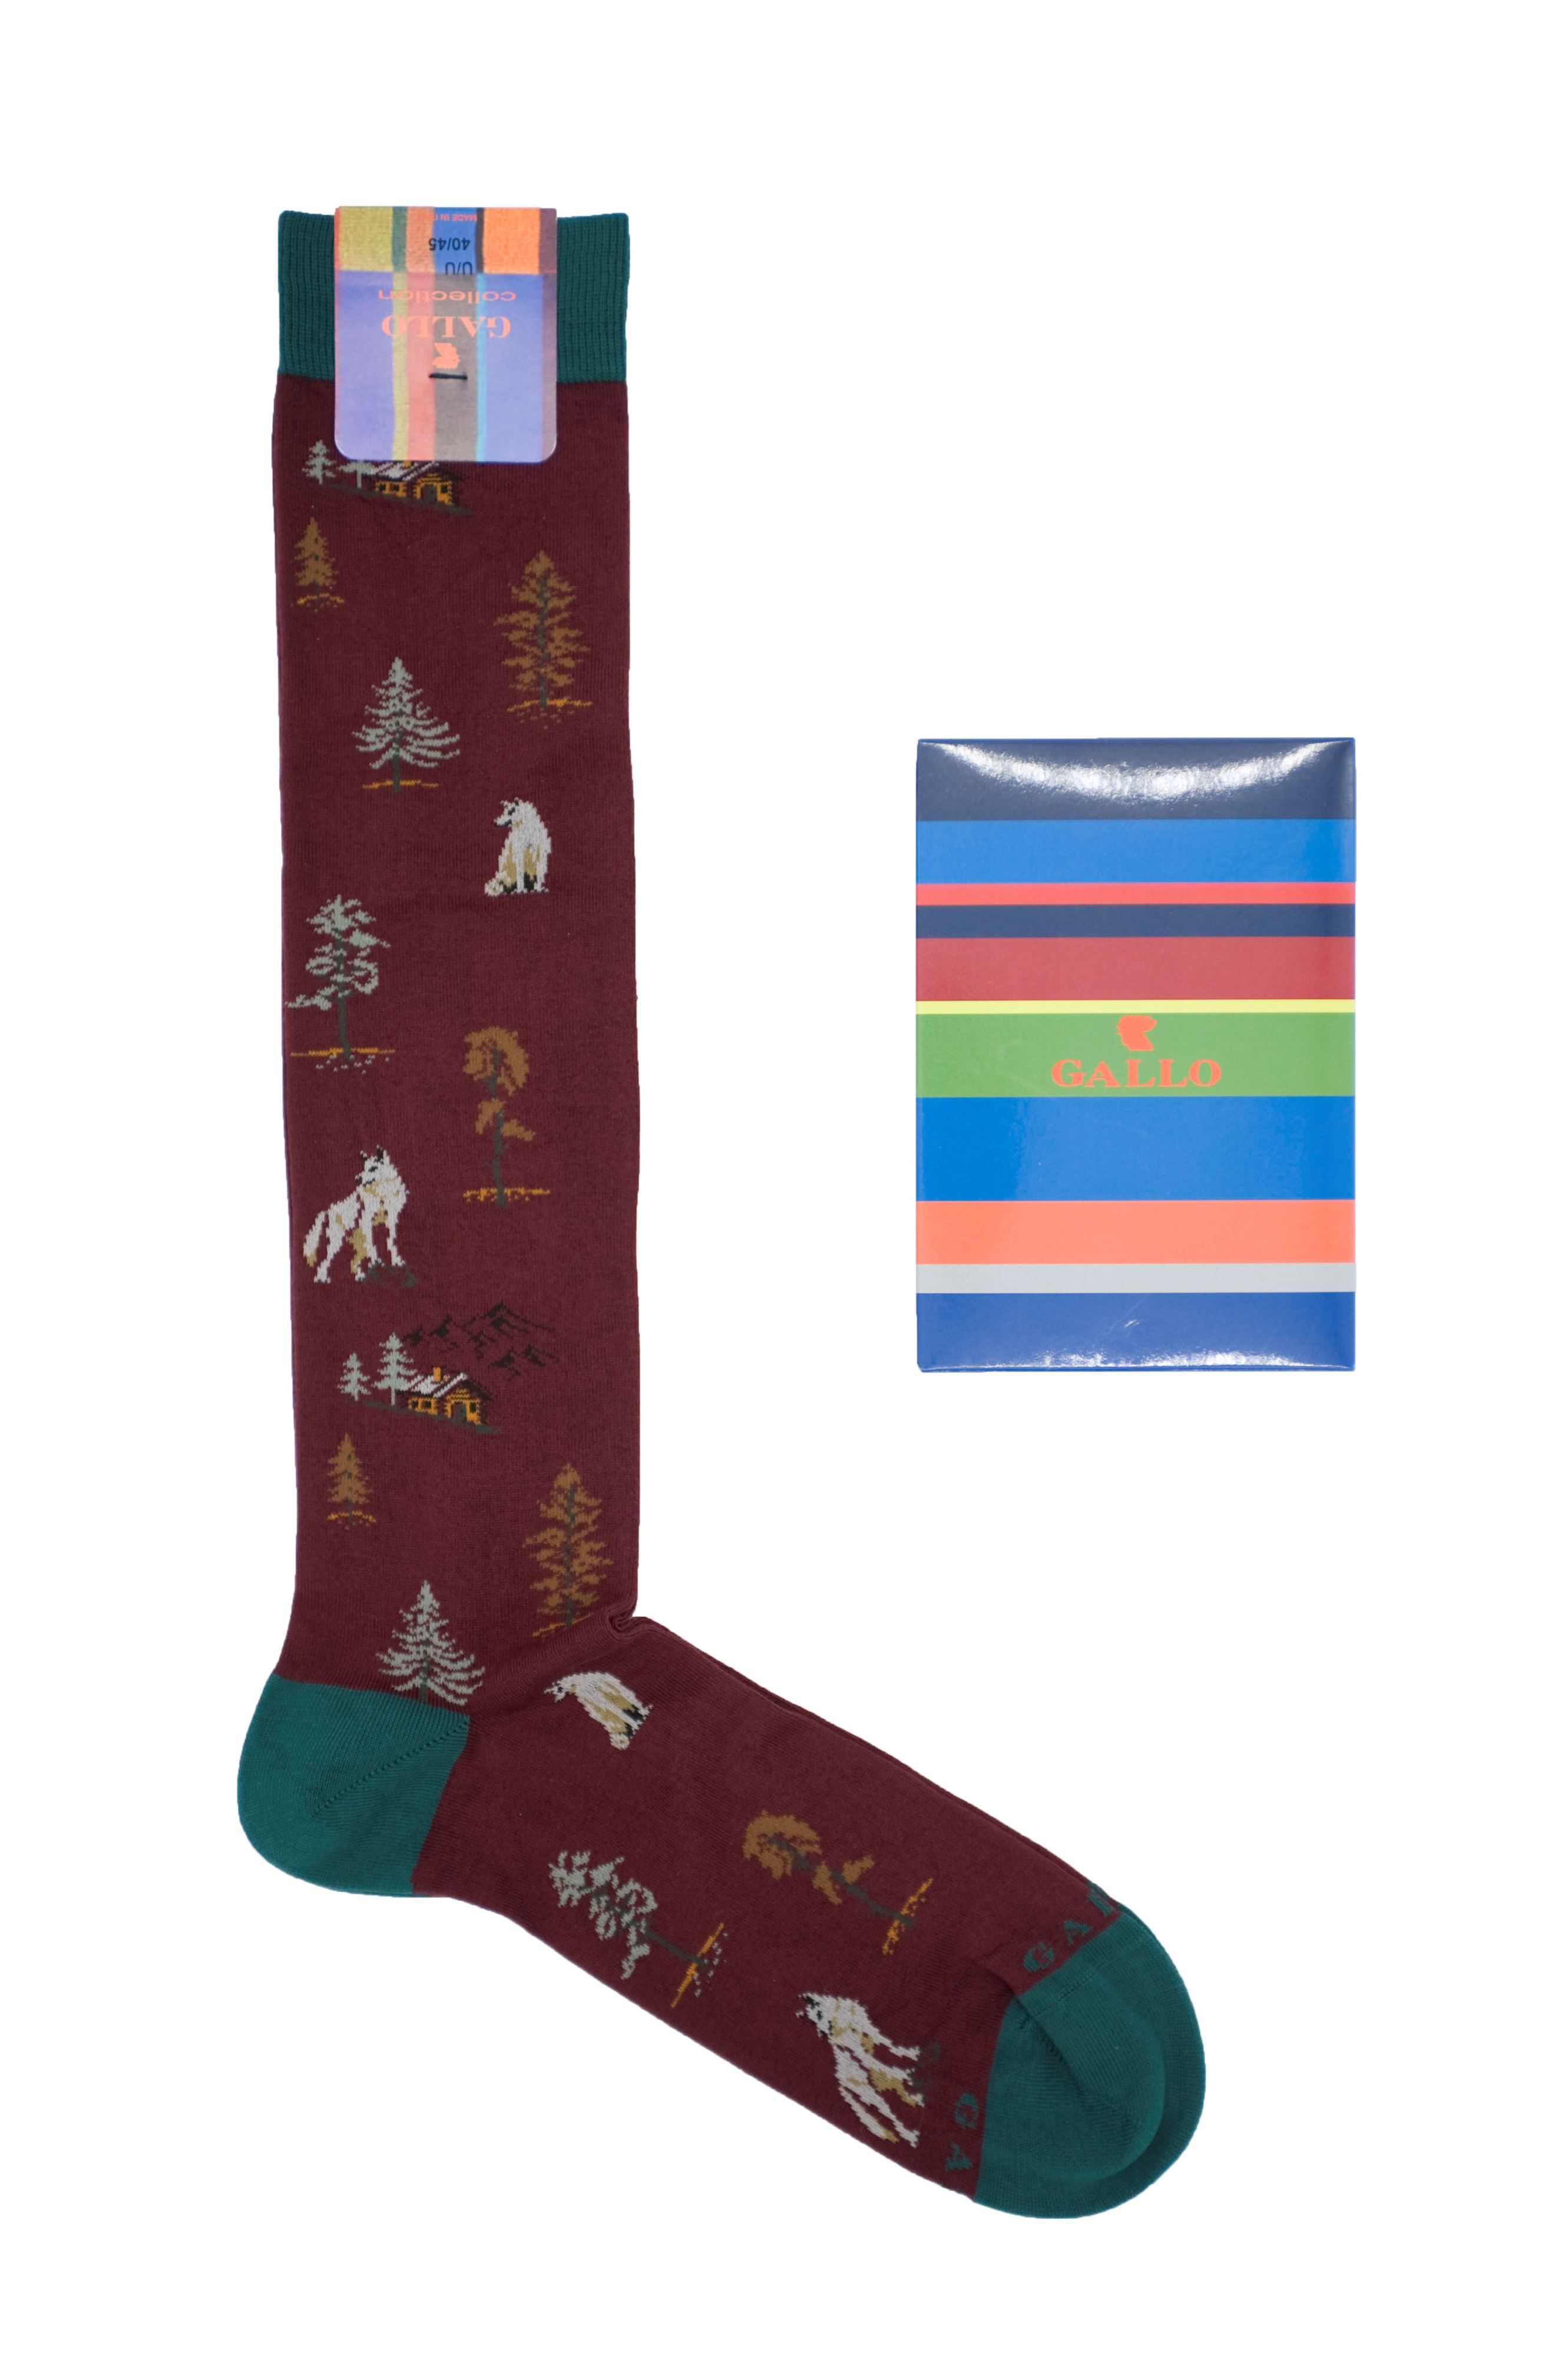 Picture of Patterned socks with wolves on a burgundy background